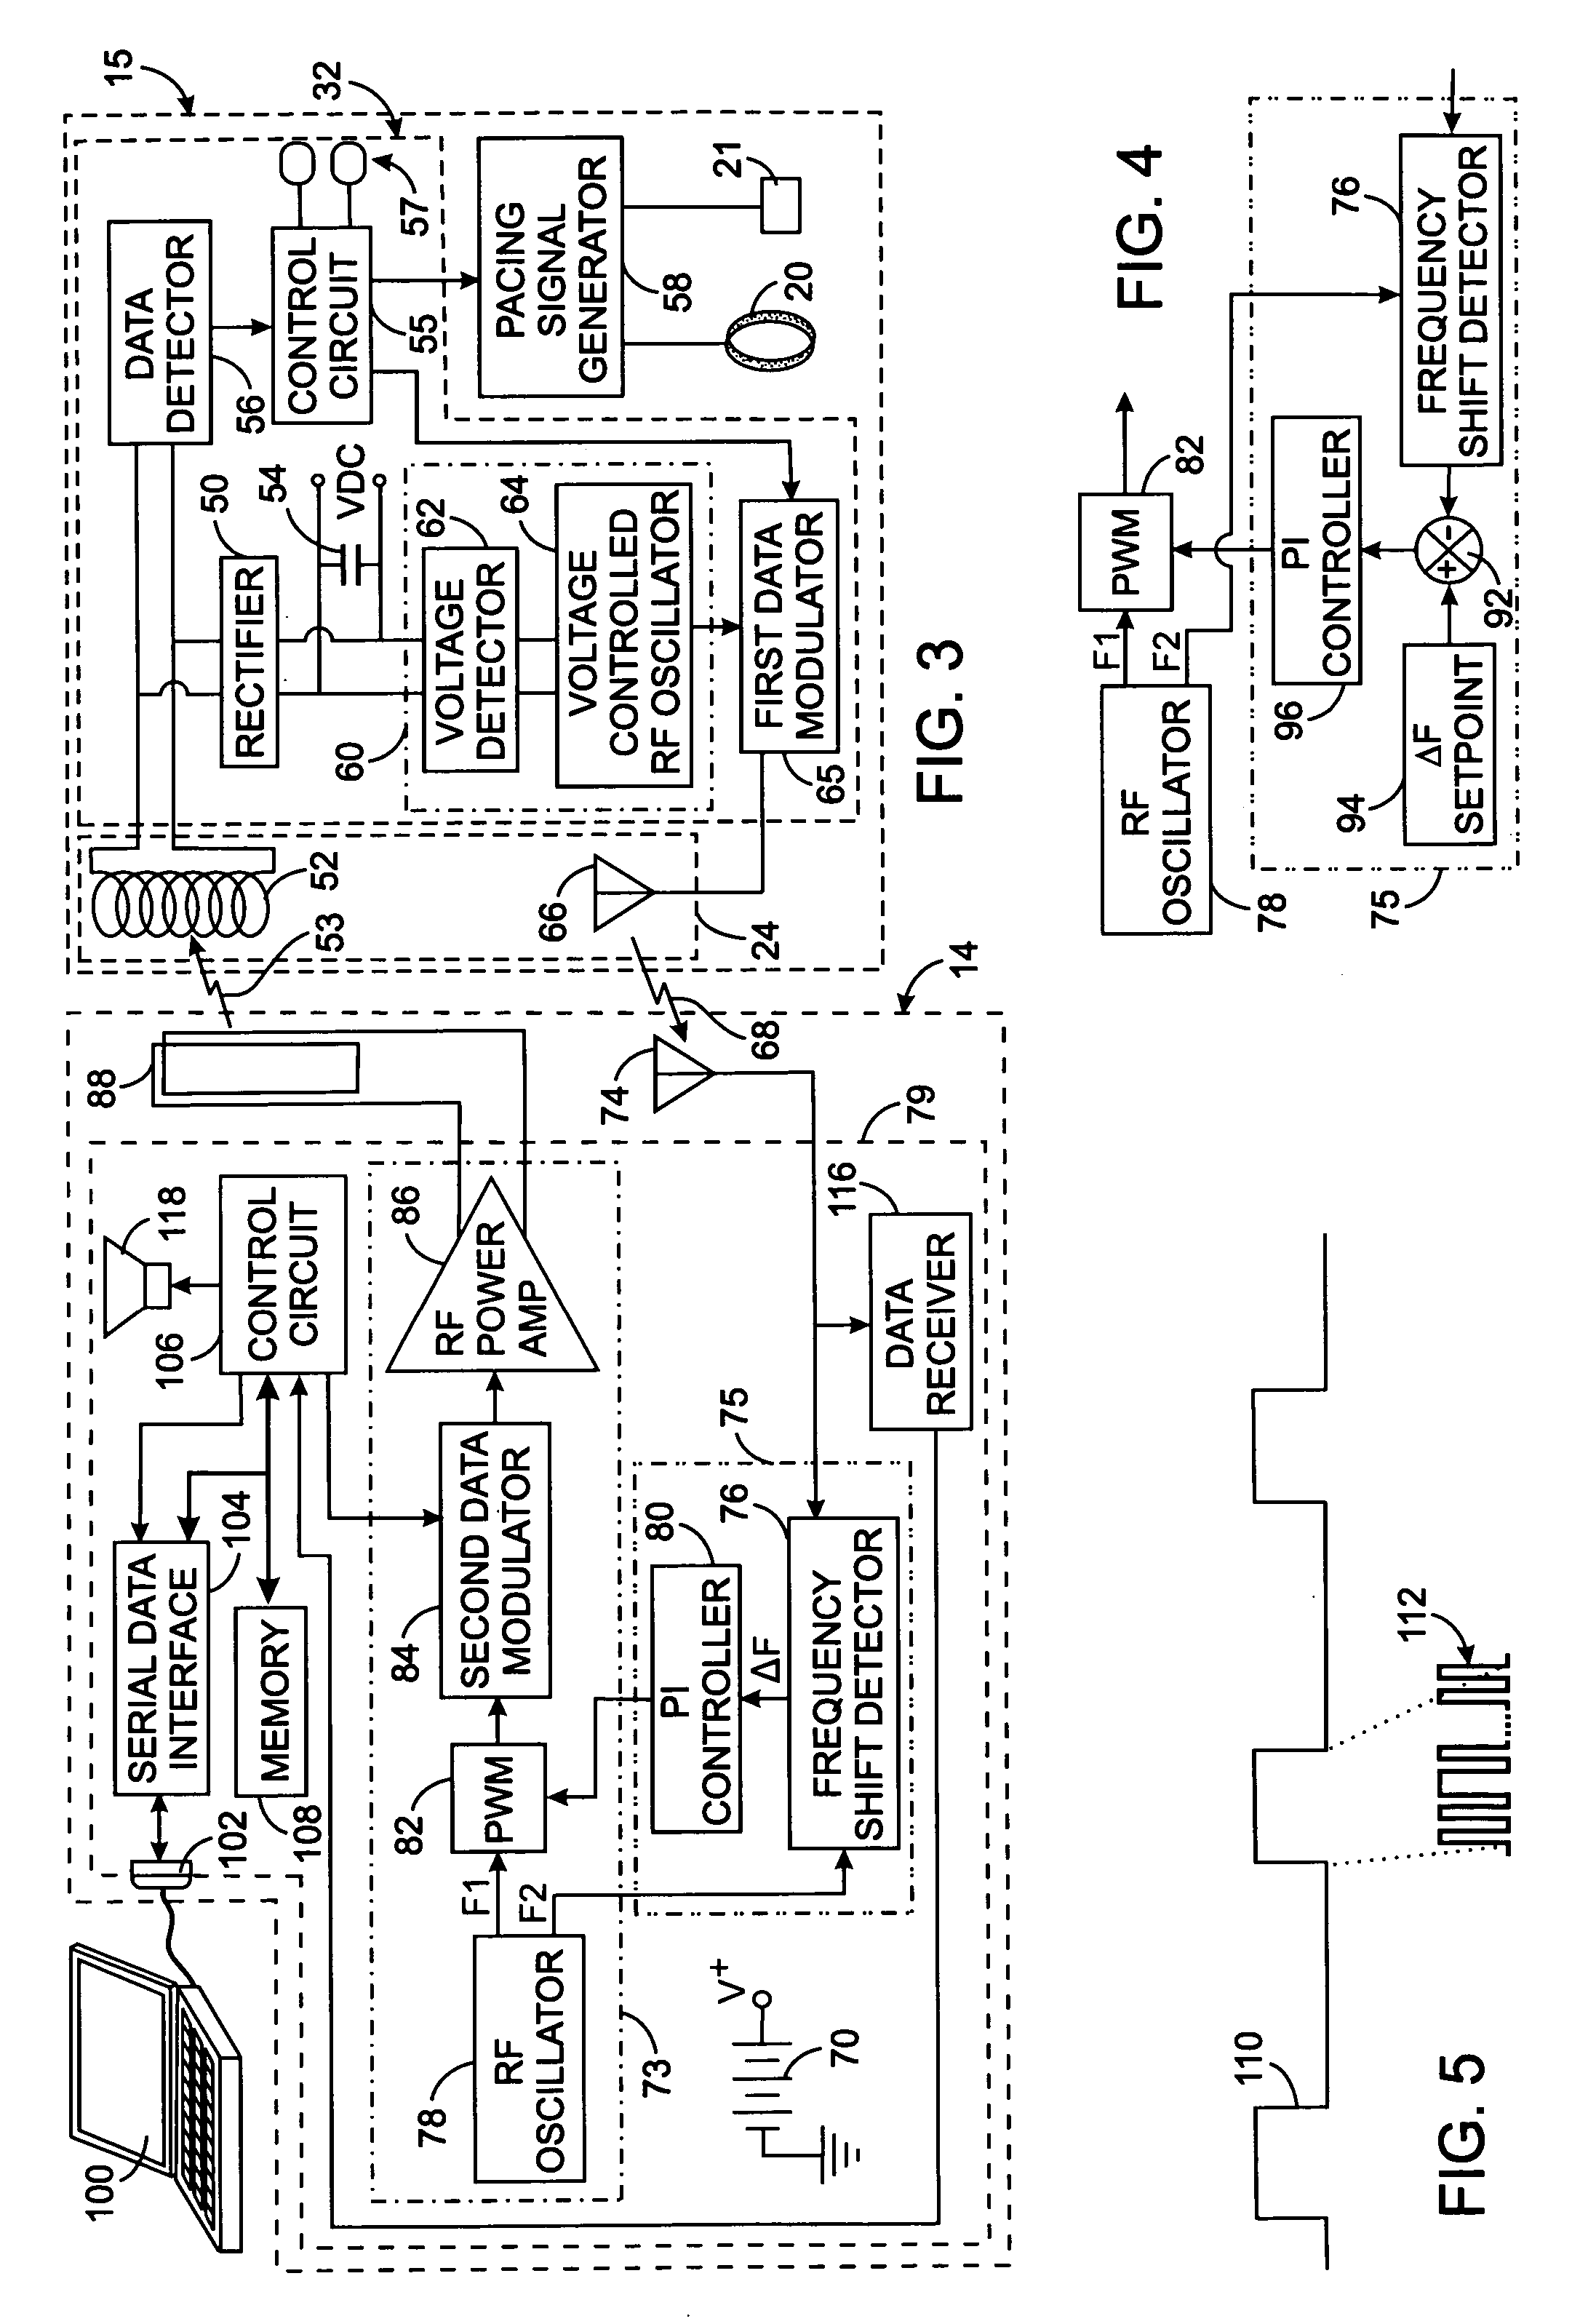 Extracorporeal power supply with a wireless feedback system for an implanted medical device